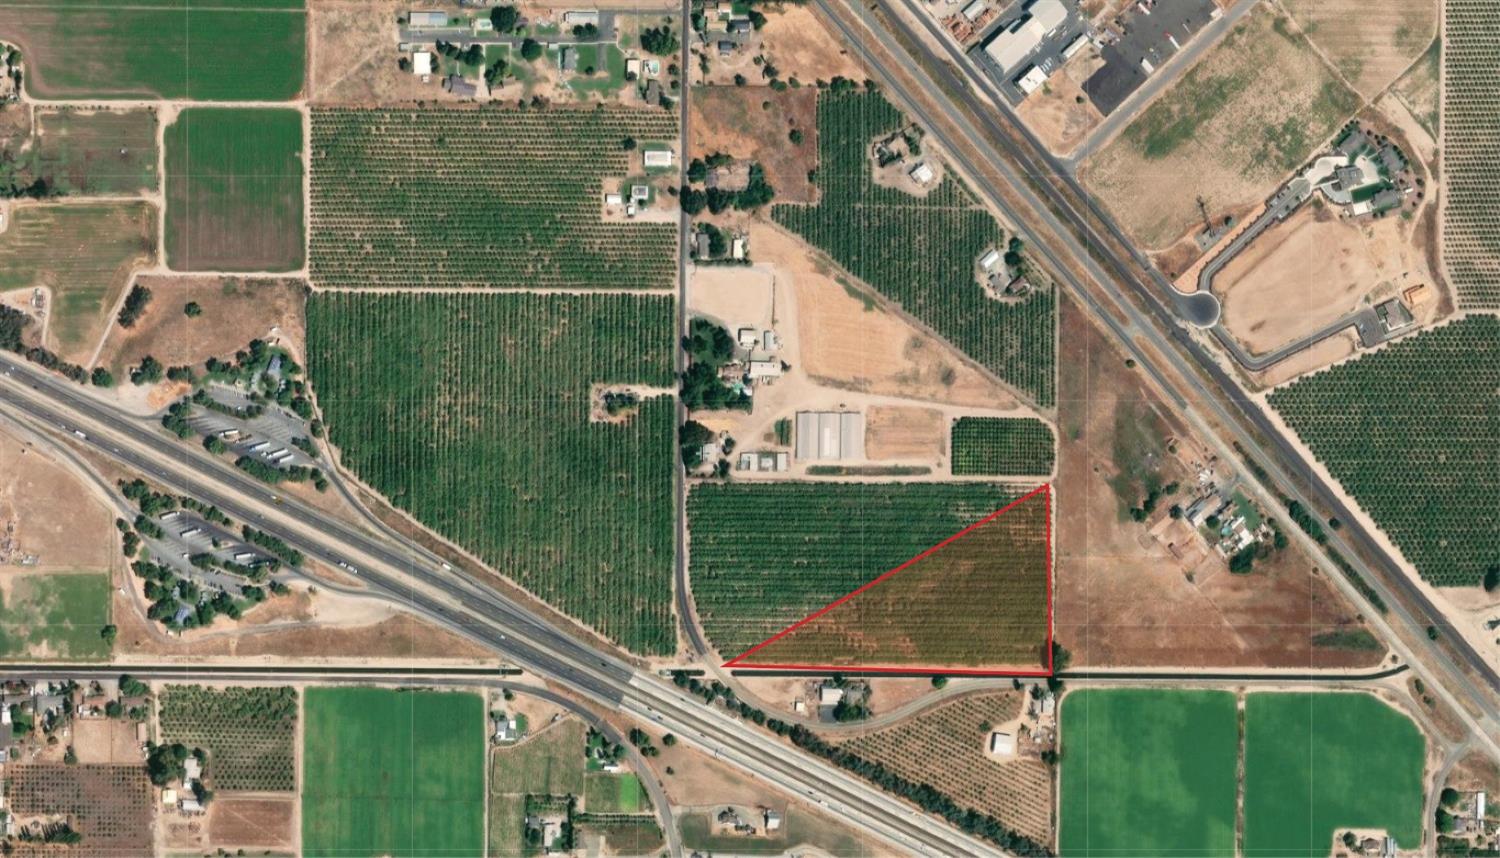 3818 Youngstown Rd Turlock, 11ac of 10yr Almonds Lots & Land